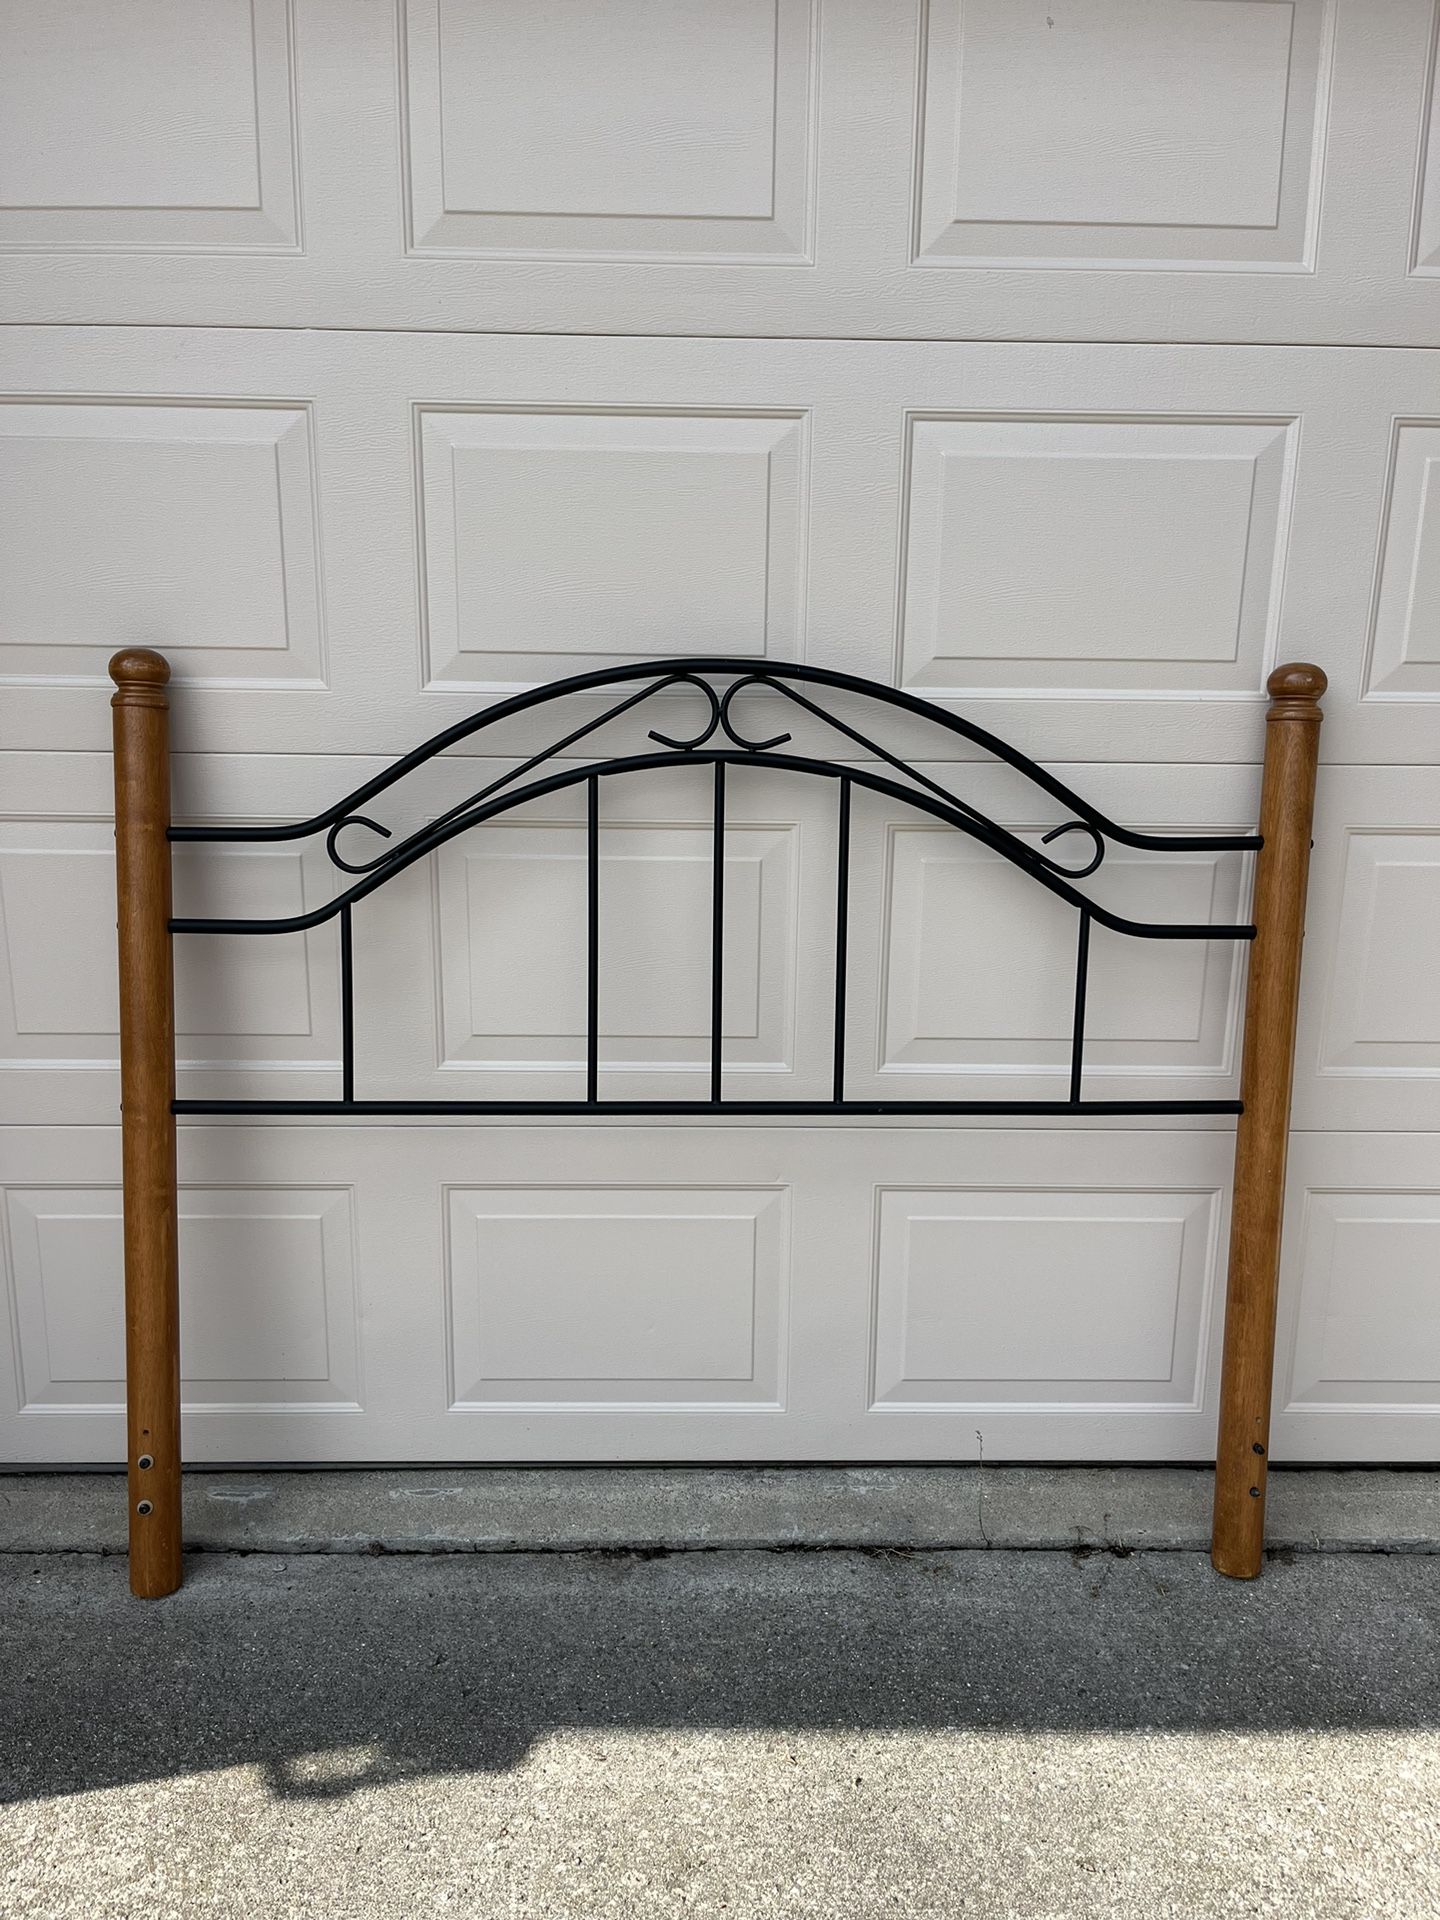 Queen size headboard with wood post and black metal frame